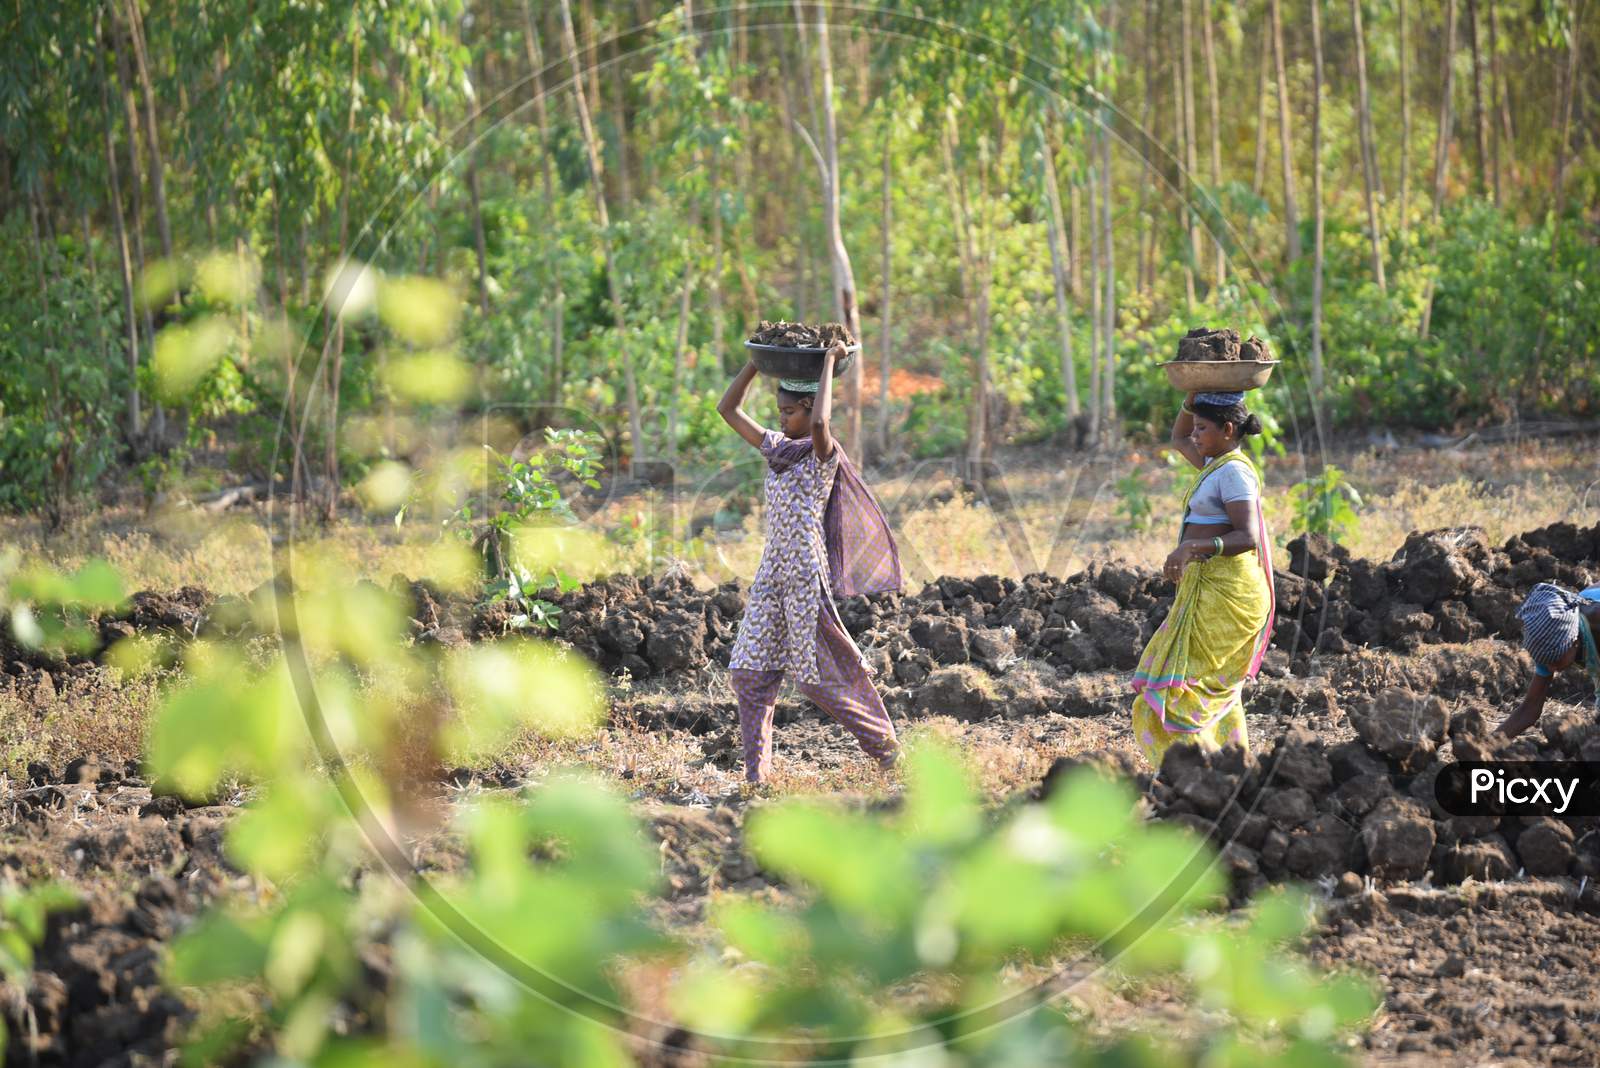 MGNREGS labourers clear the land for the cultivation of paddy crops at a field in Velairpadu, Andhra Pradesh, May 15, 2020.